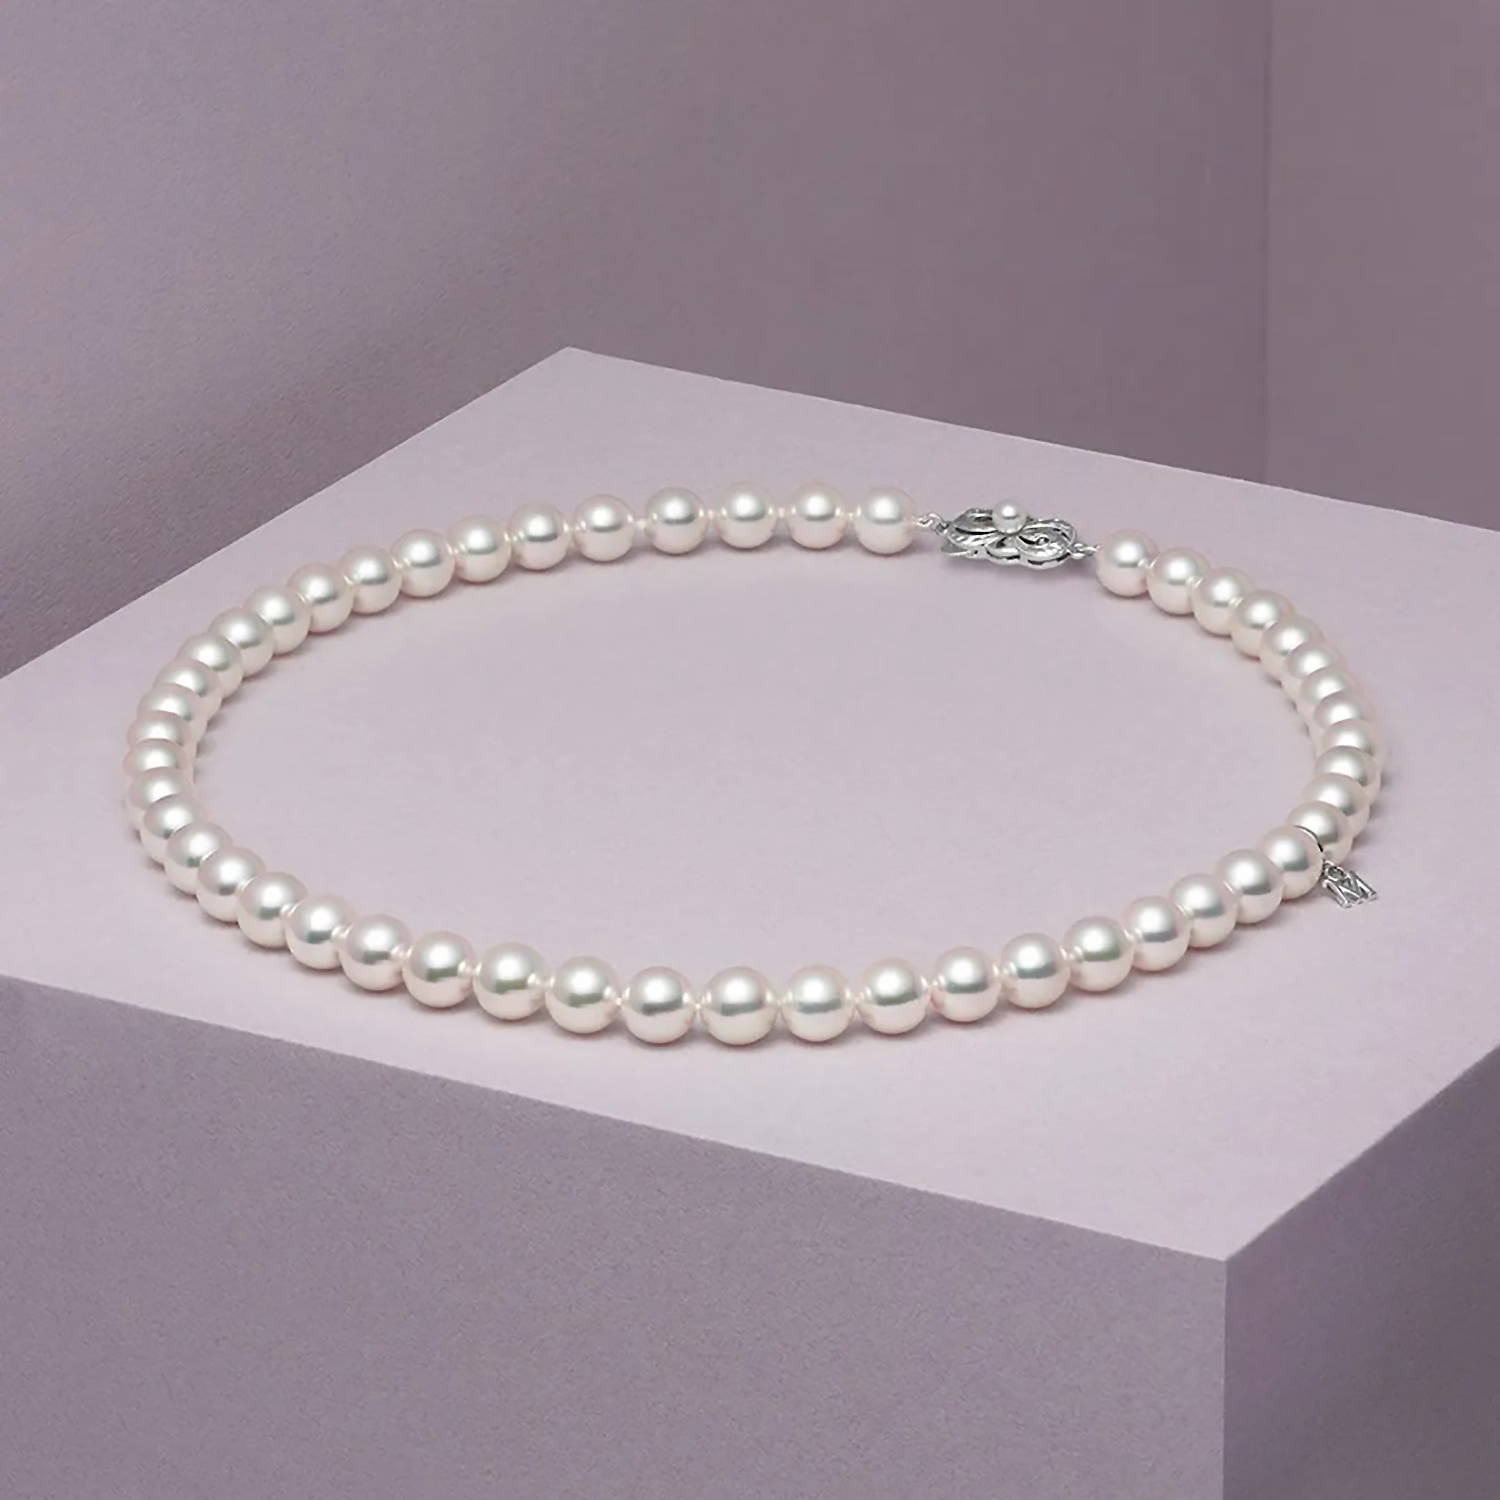 Mikimoto Pearl Necklace Close Up